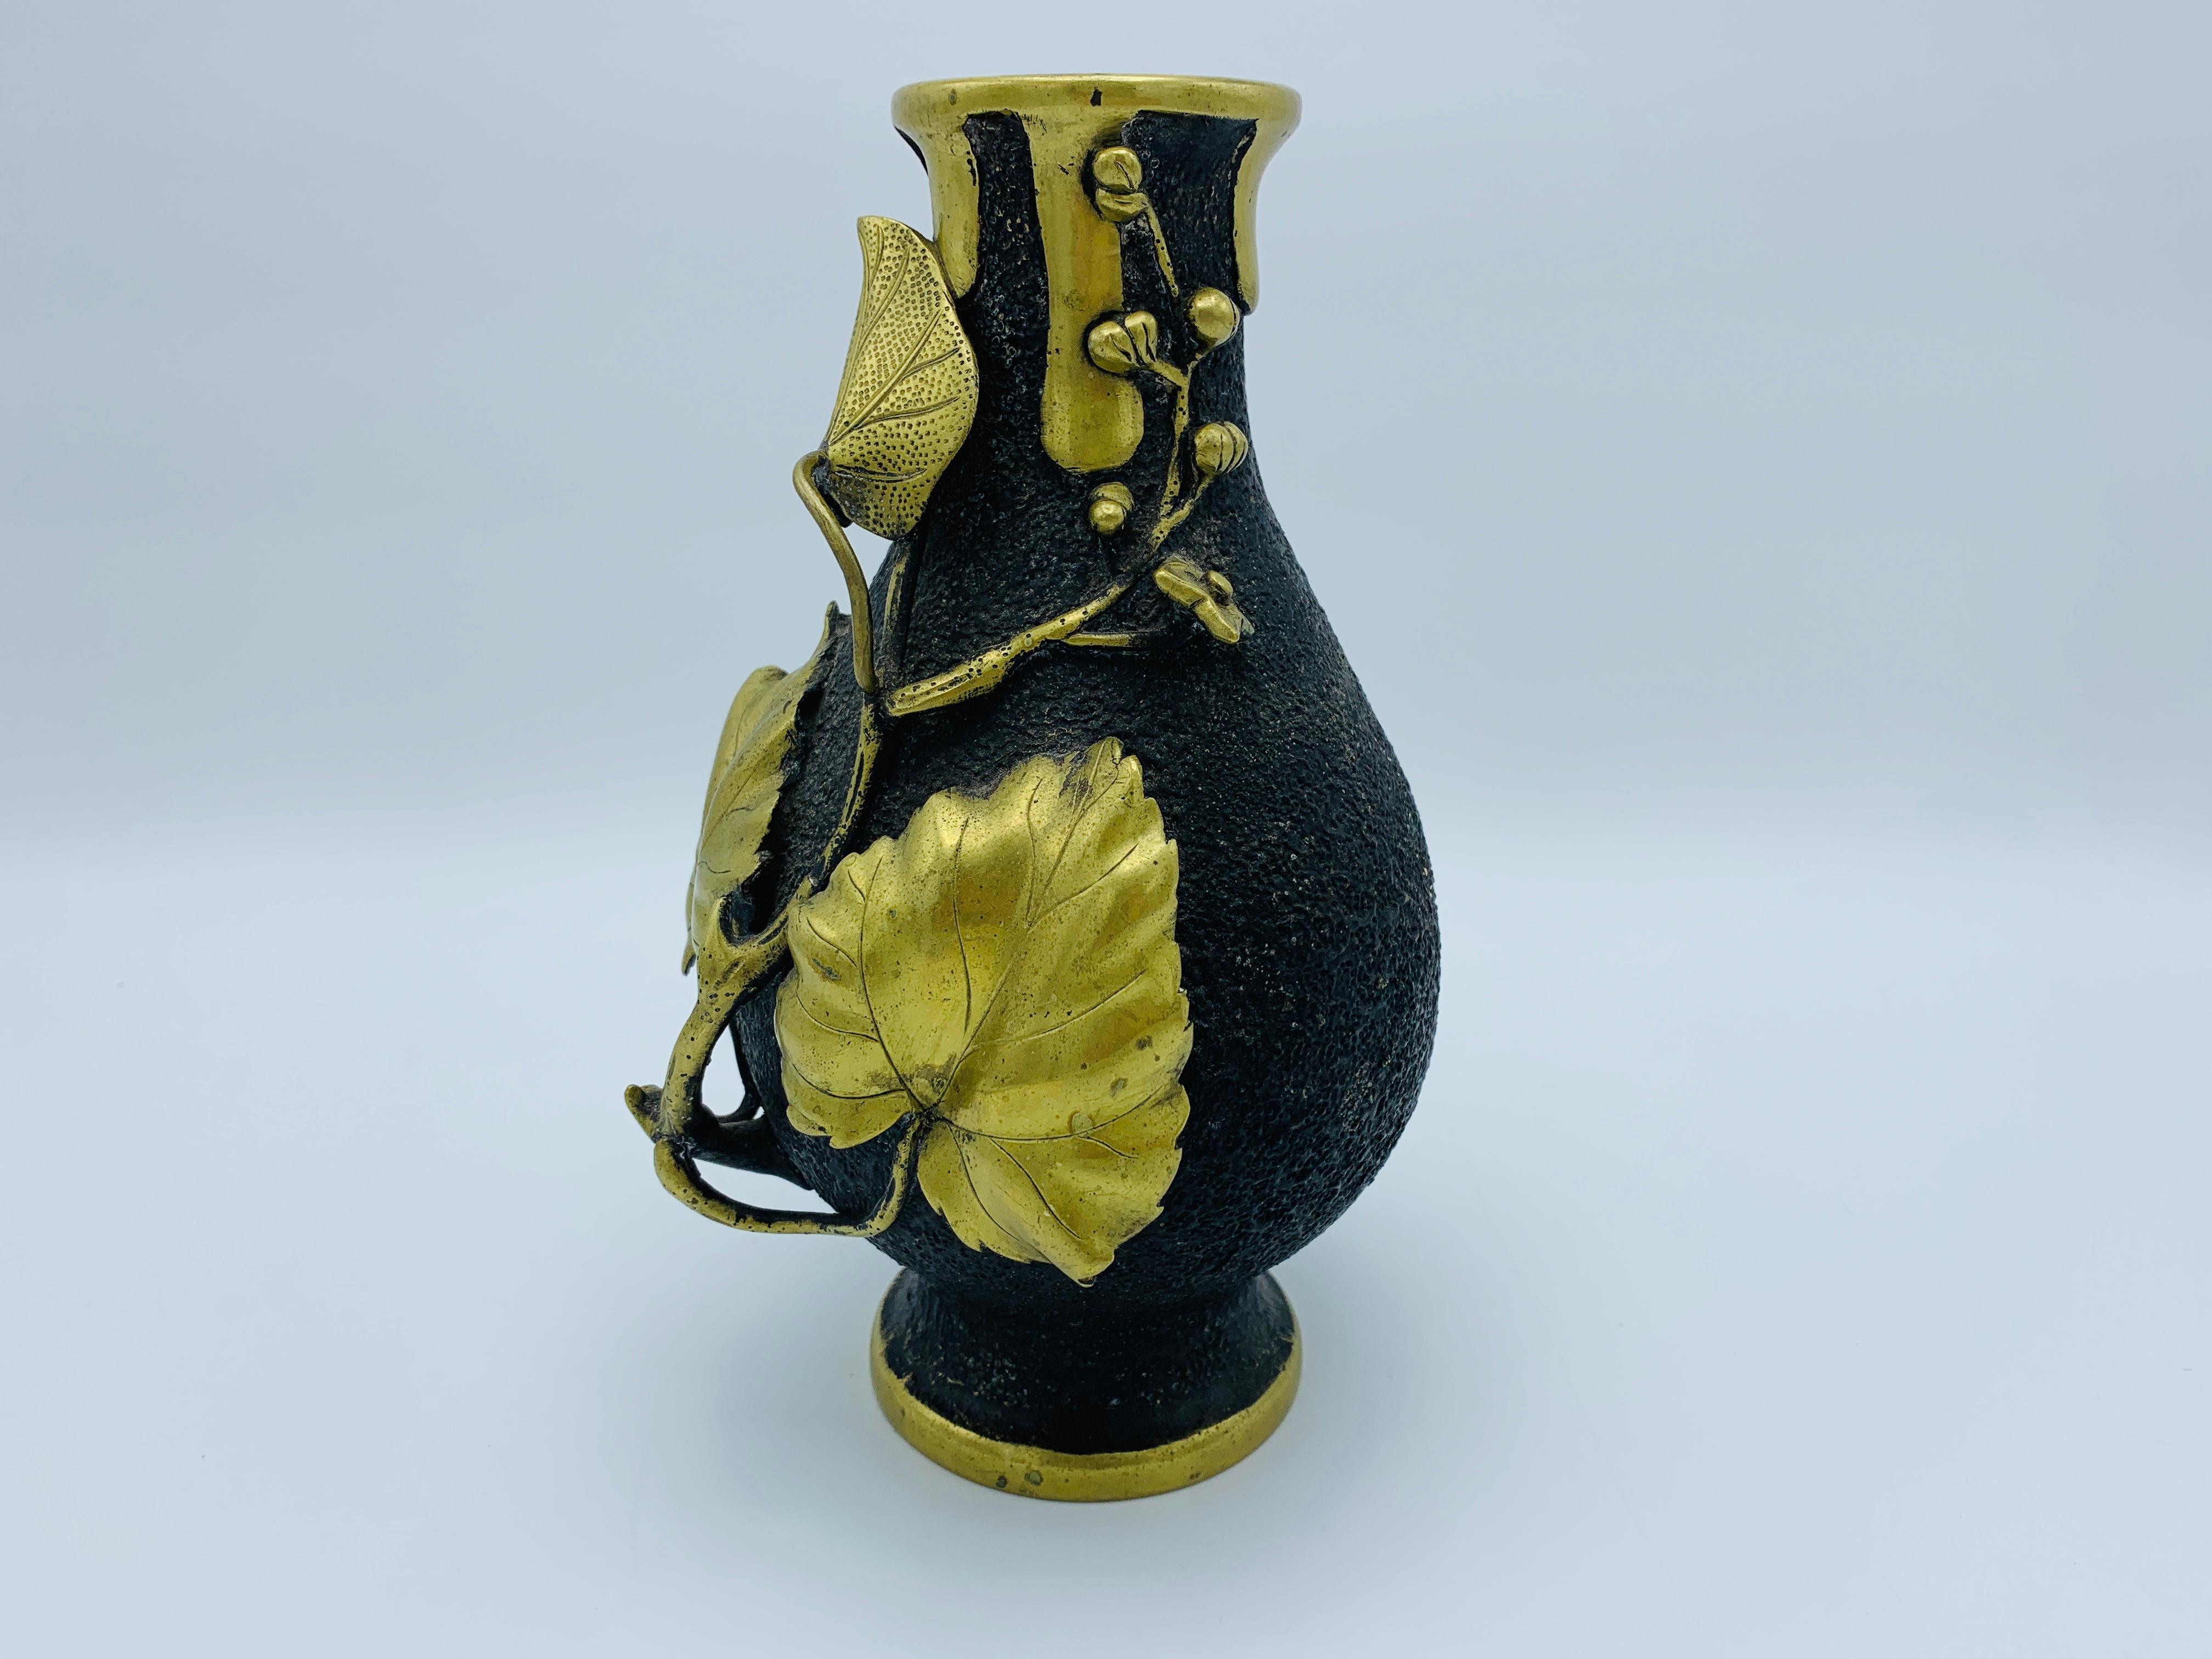 Offered is an exquisite, 19th century French sculptural bronze vase. This piece is handcrafted from bronze, with an intricate, organic trailing of sculptural leaves and berries. The darker, 'black' portion of the vase is a texturized bronze. The